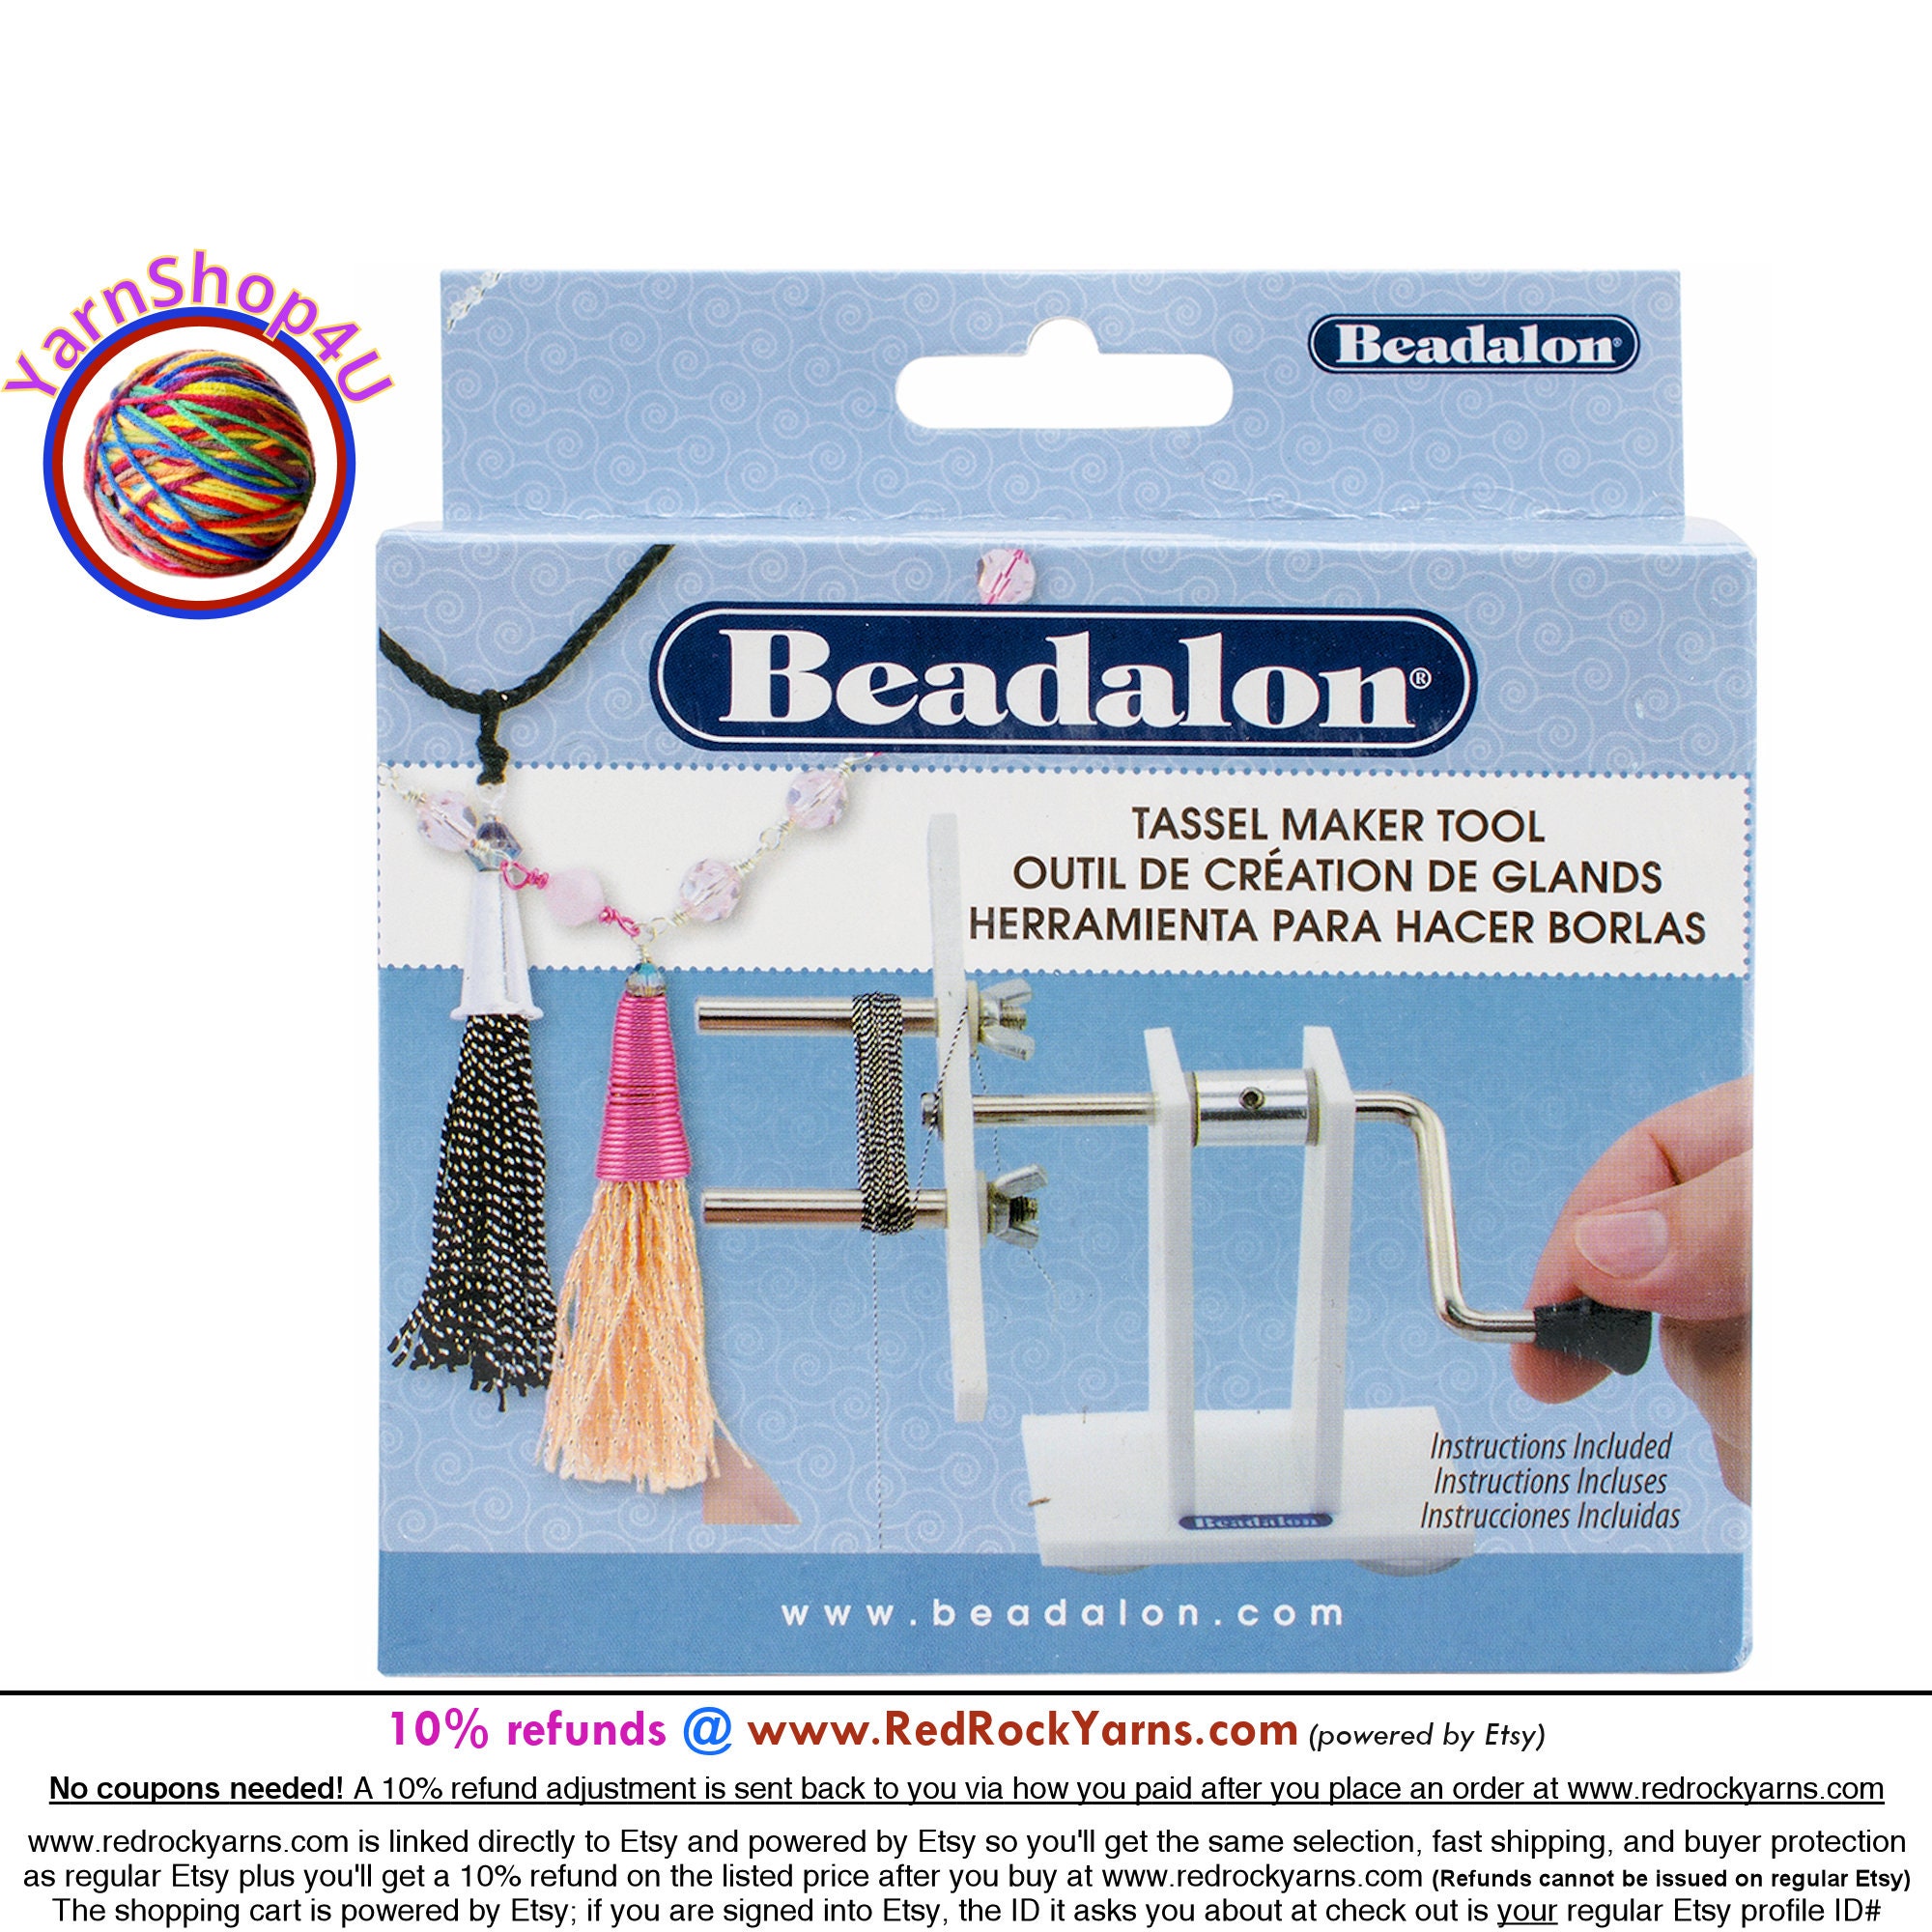 Beadalon Tassel Maker Tool. Makes tassels from about 1 to 3.5. Hand crank,  suction cup feet, adjustable pegs for different size tassels.